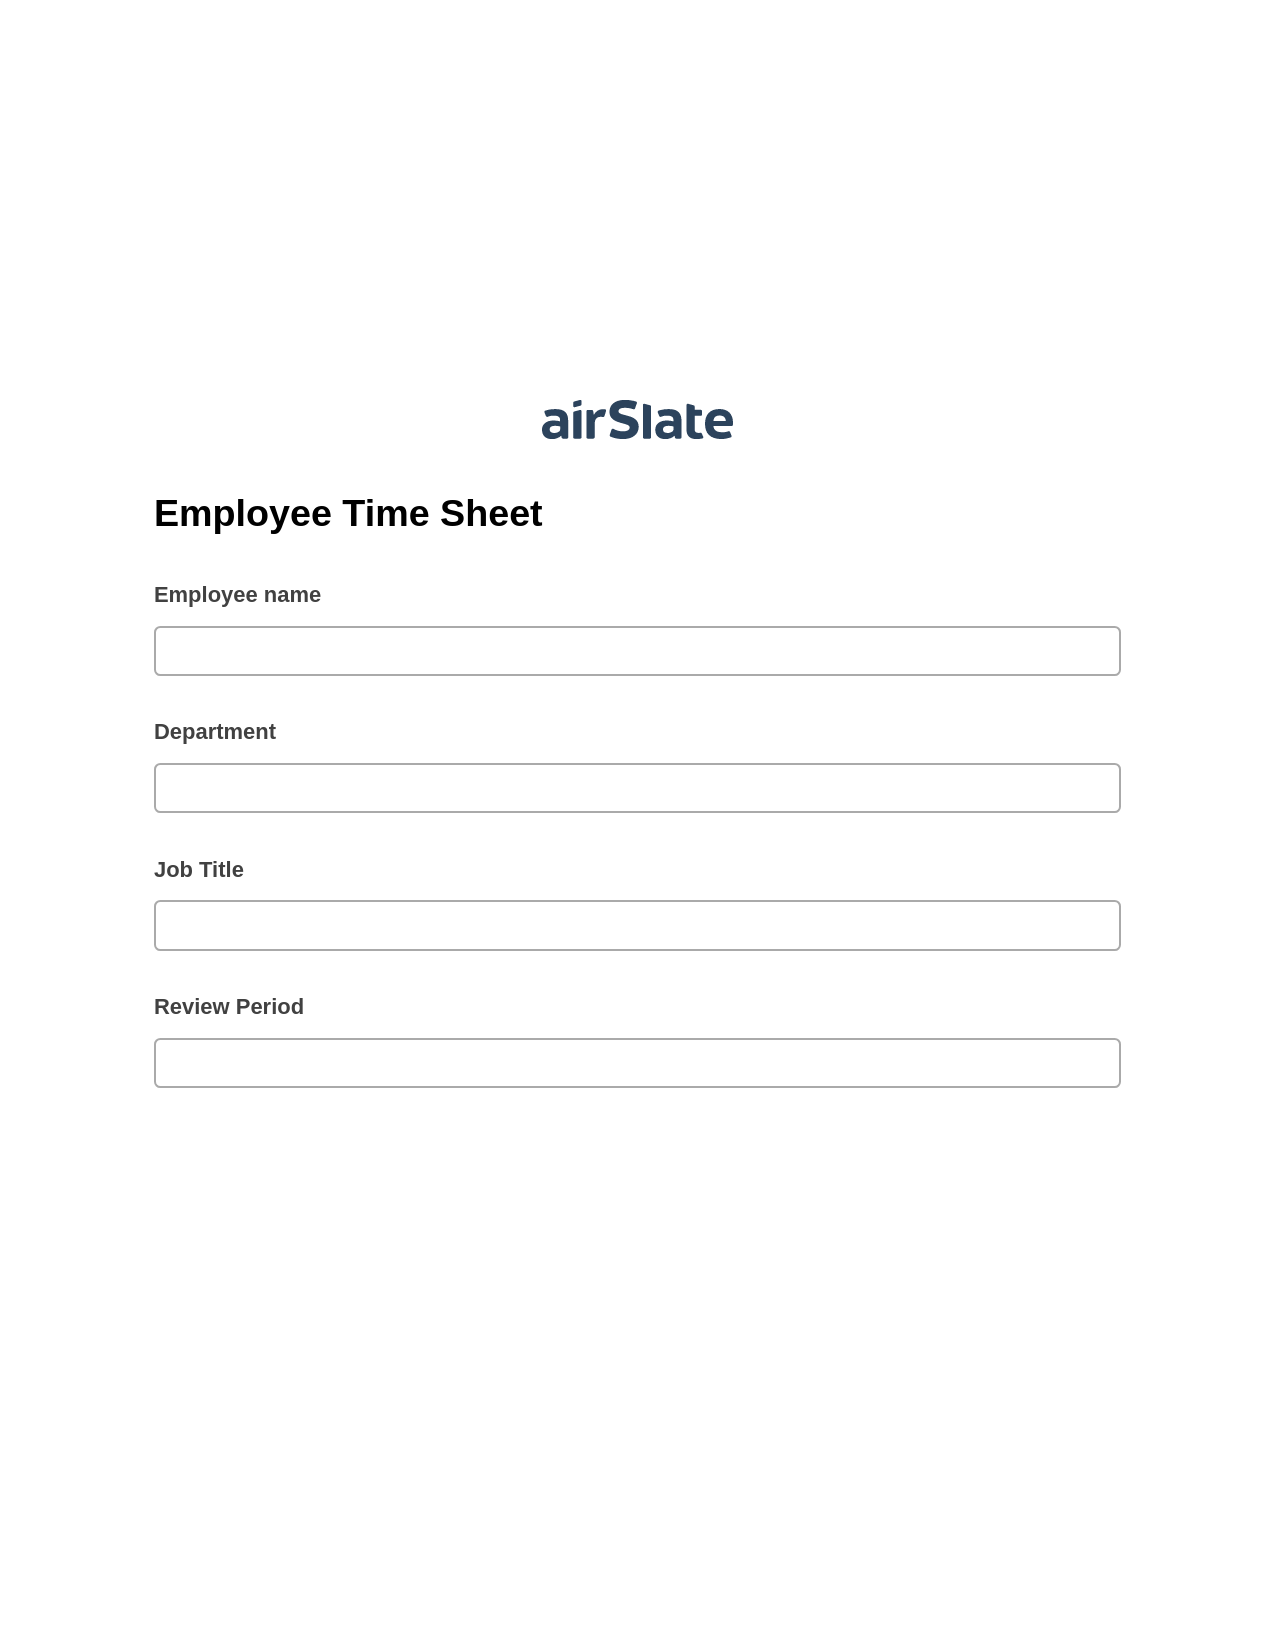 Employee Time Sheet Pre-fill Dropdowns from Excel Bot, Create slate addon, Archive to SharePoint Folder Bot